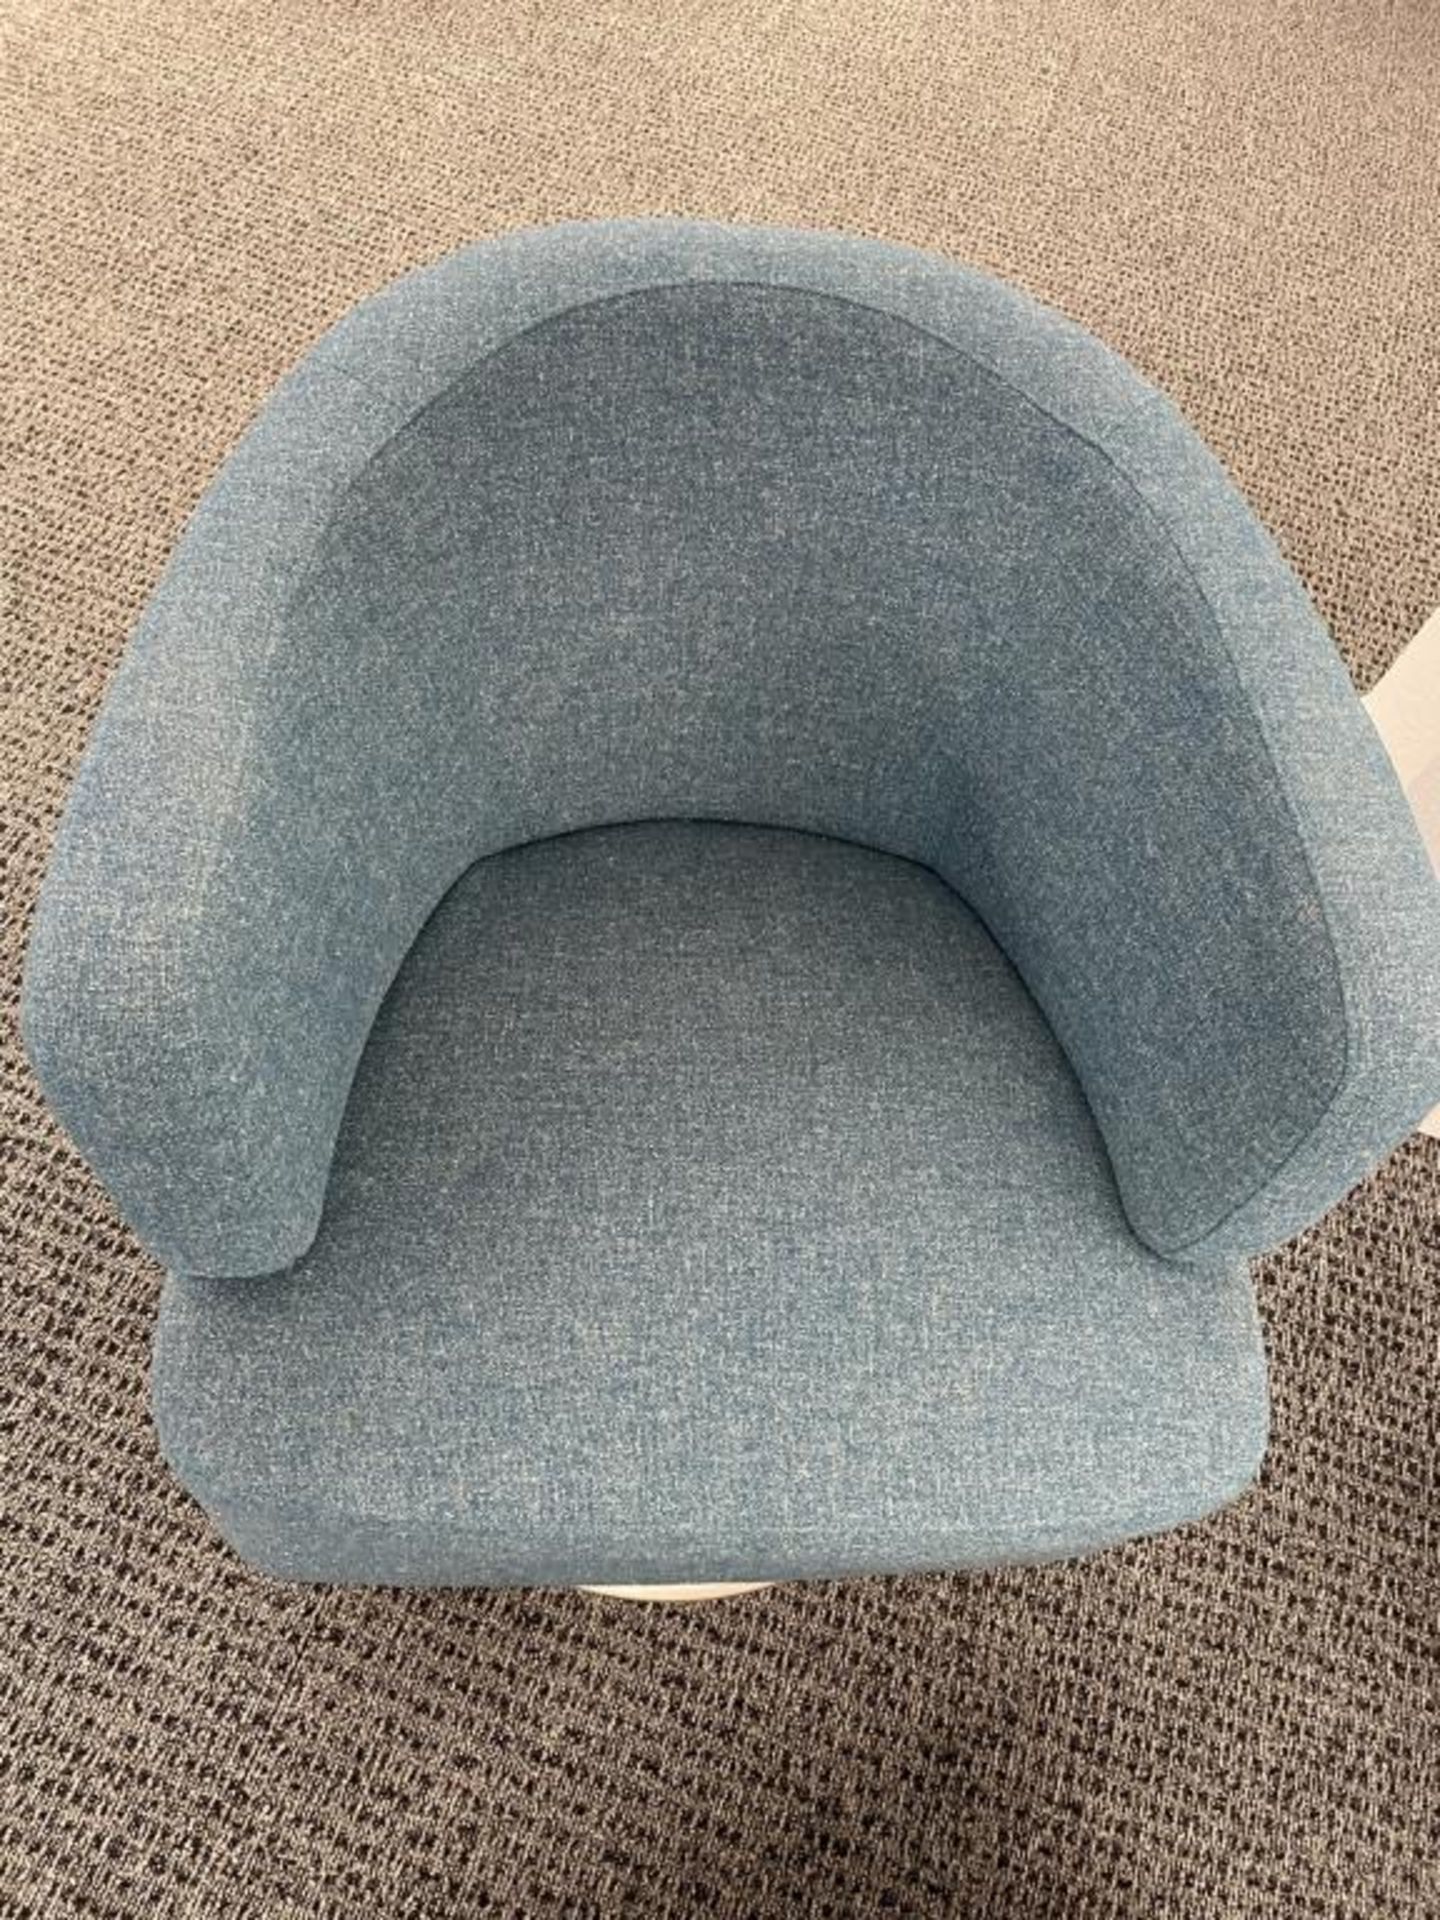 (3qty) Jason Furniture Teal Swivel Chairs - Image 4 of 9